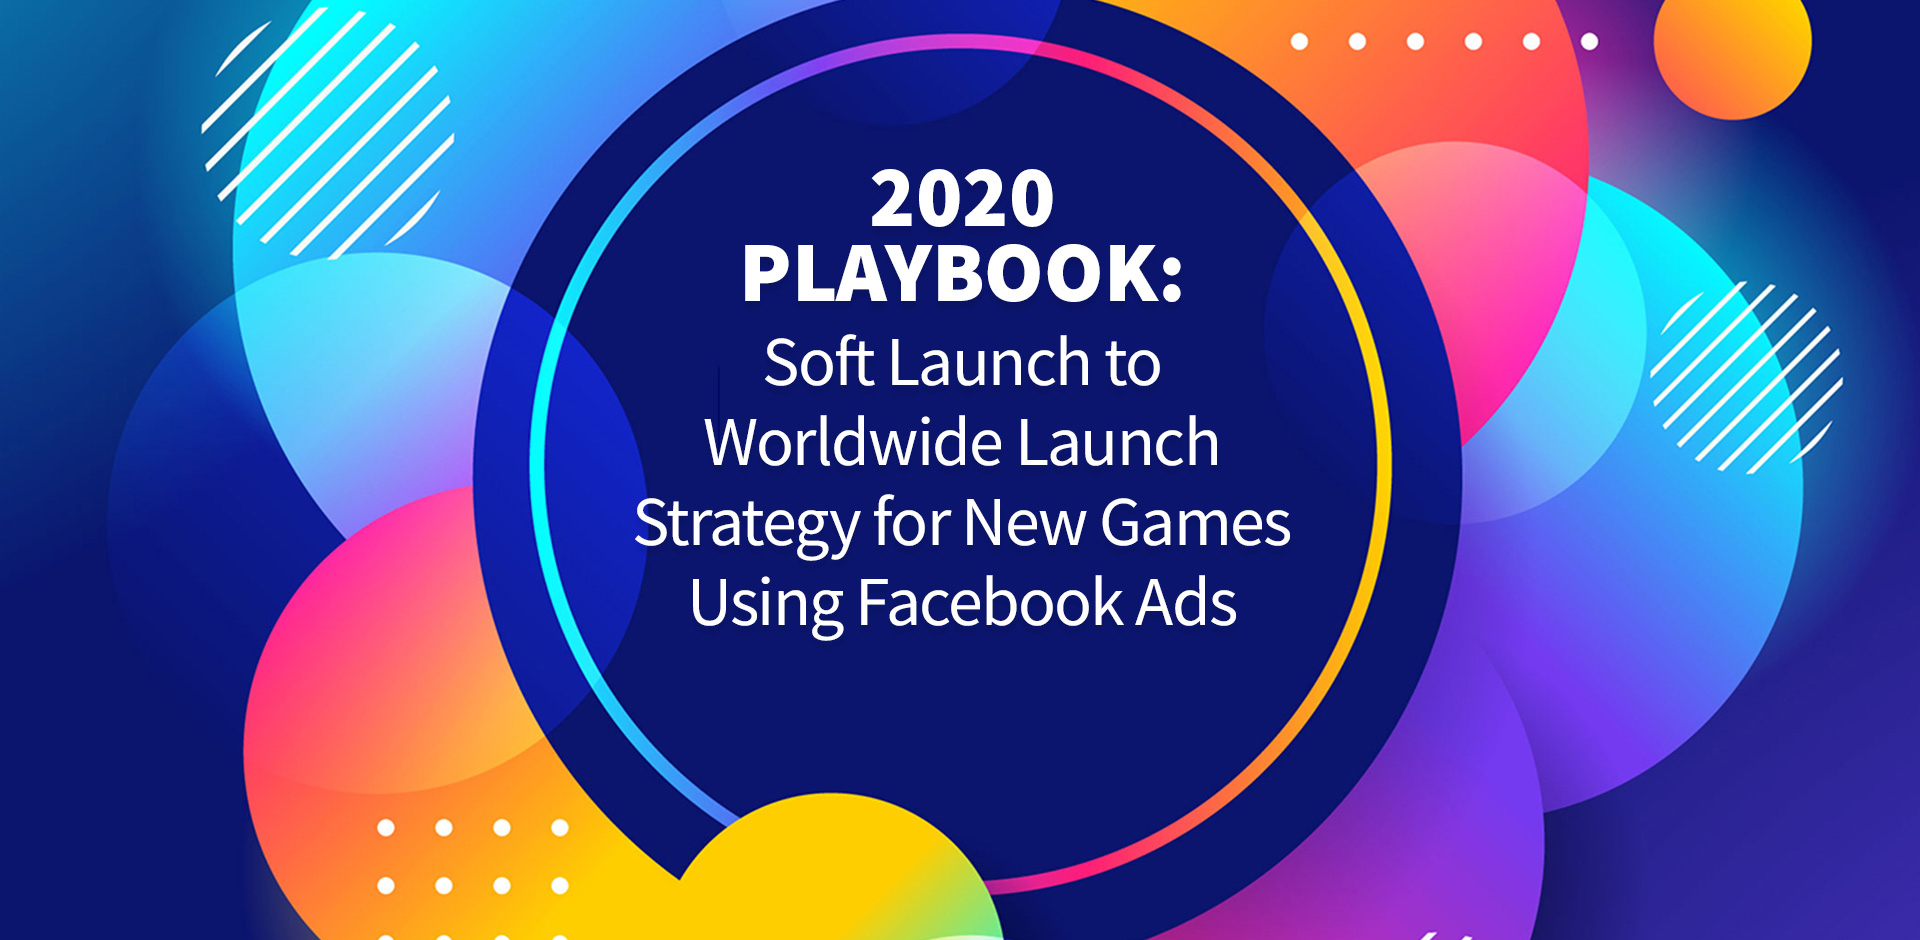 2020 Playbook: Soft Launch To Worldwide Launch Strategy for New Games Using Facebook Ads